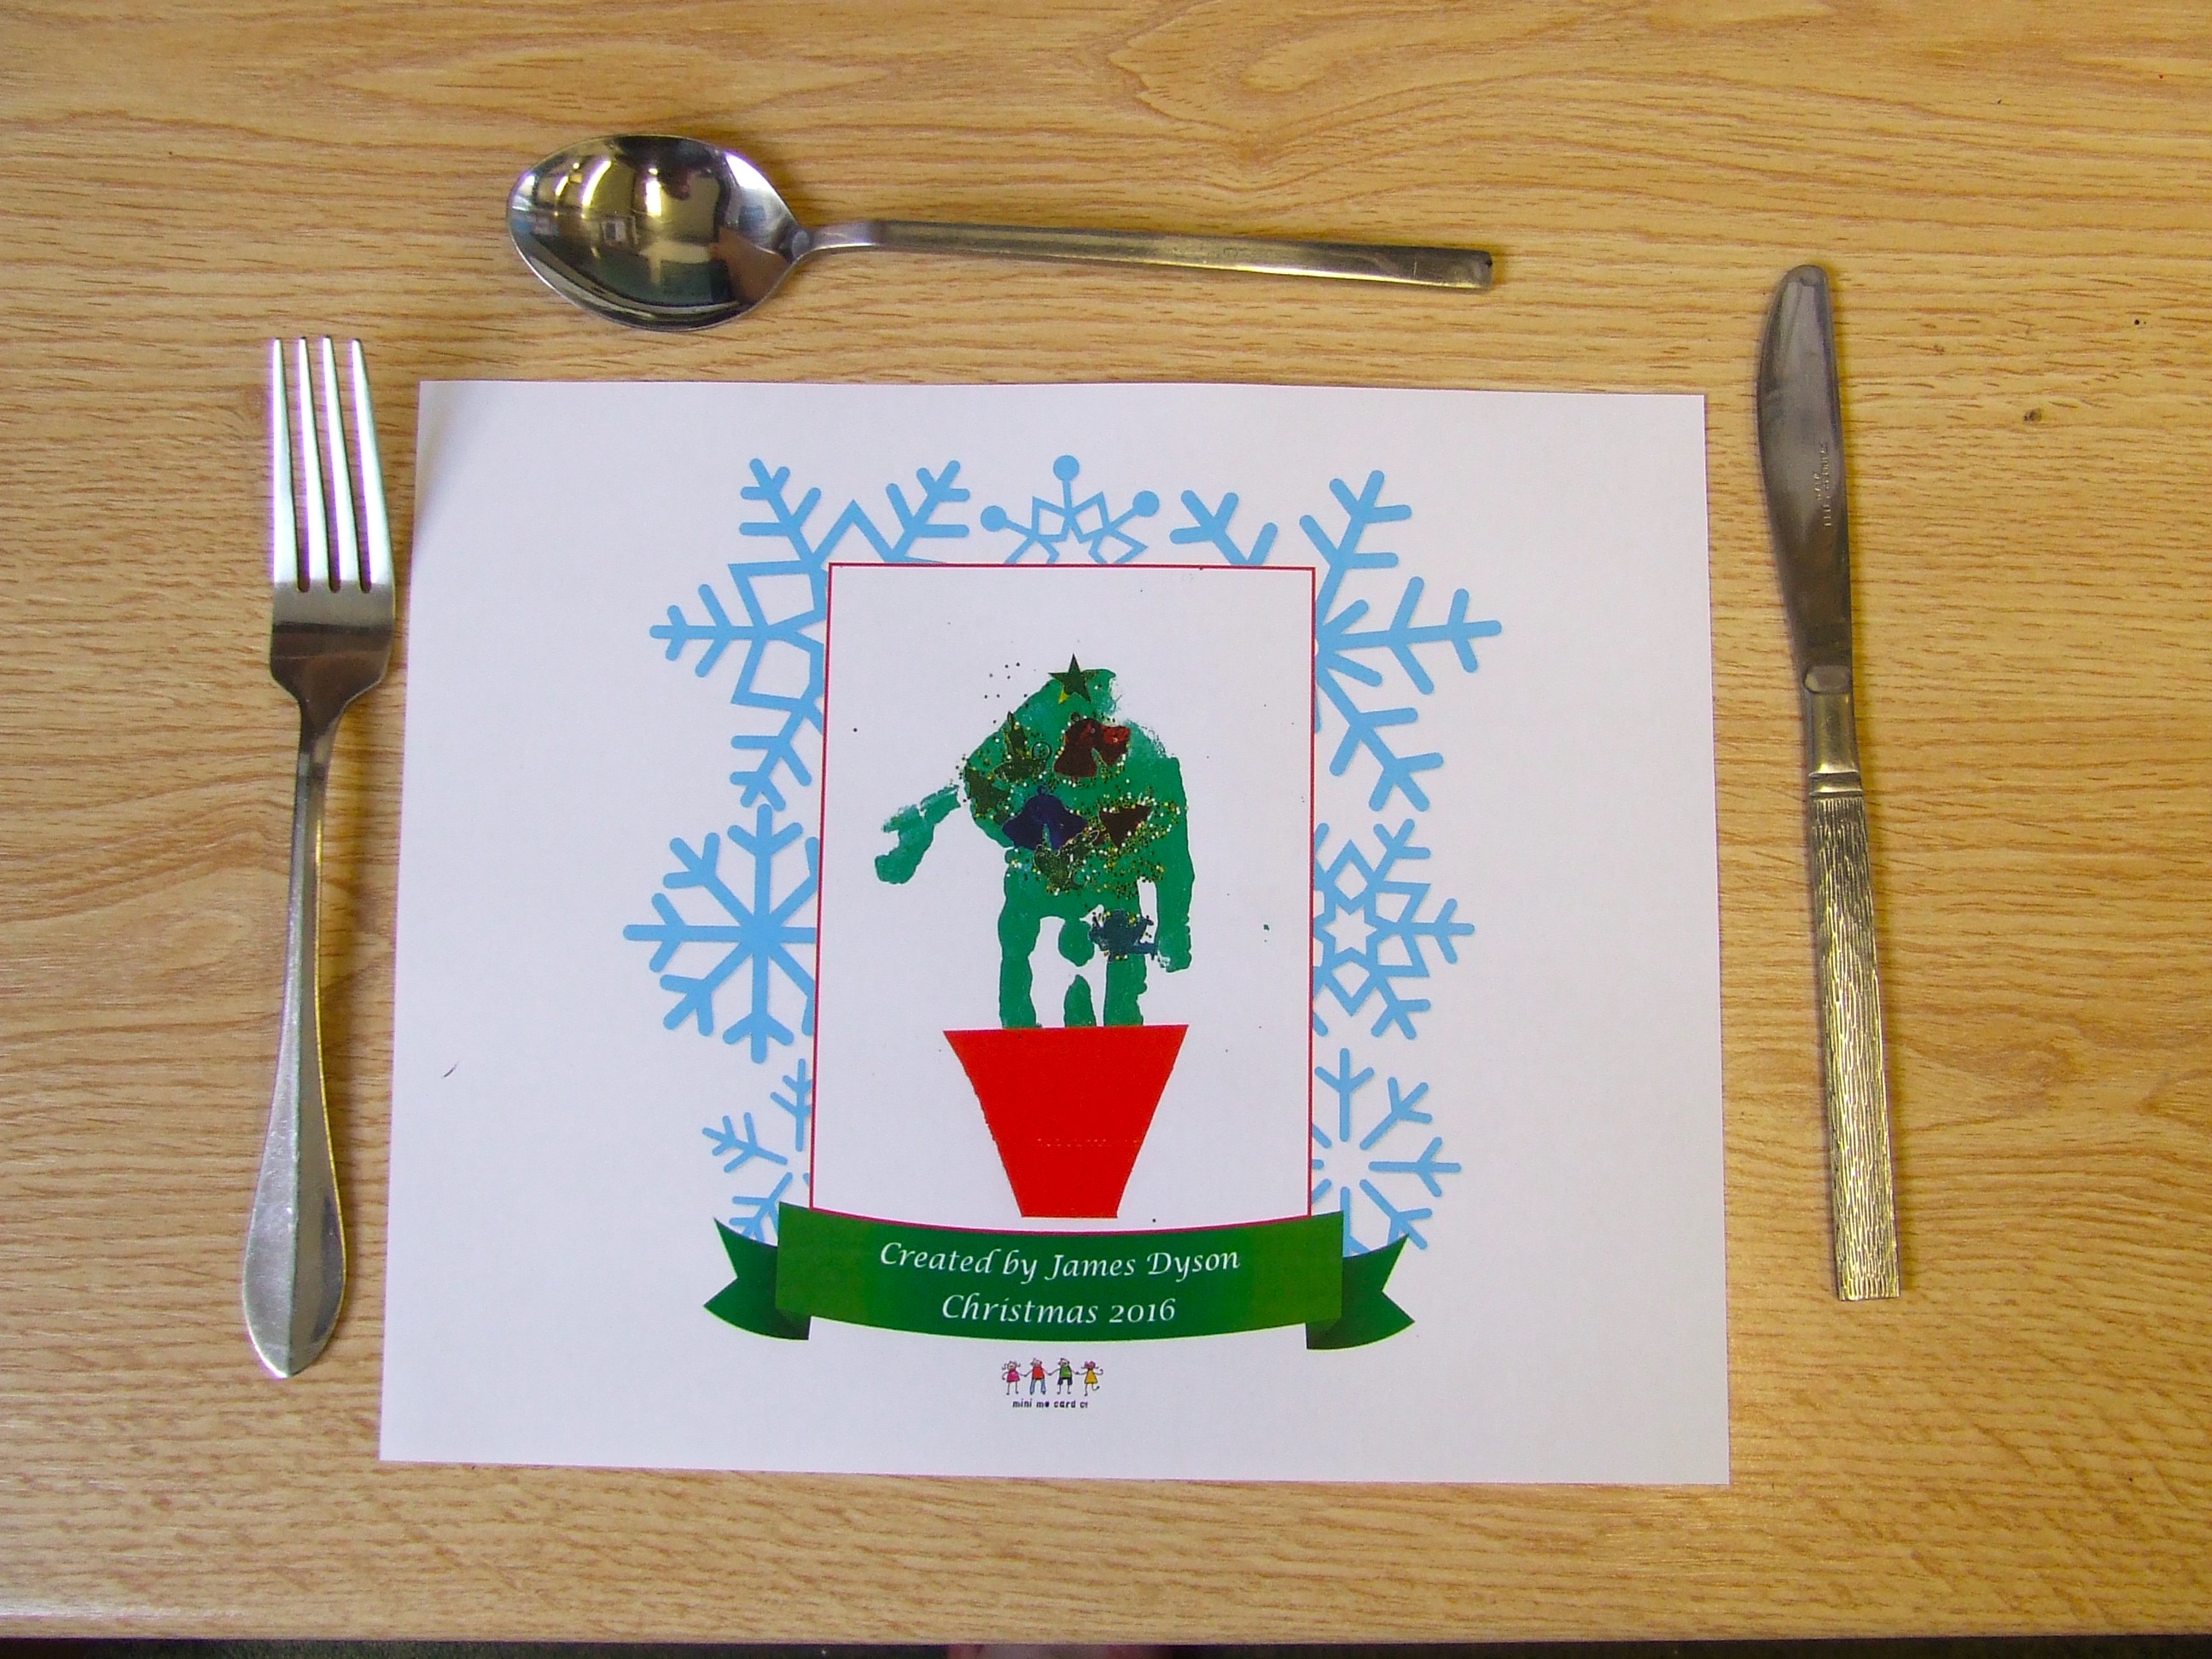 Christmas Placemat